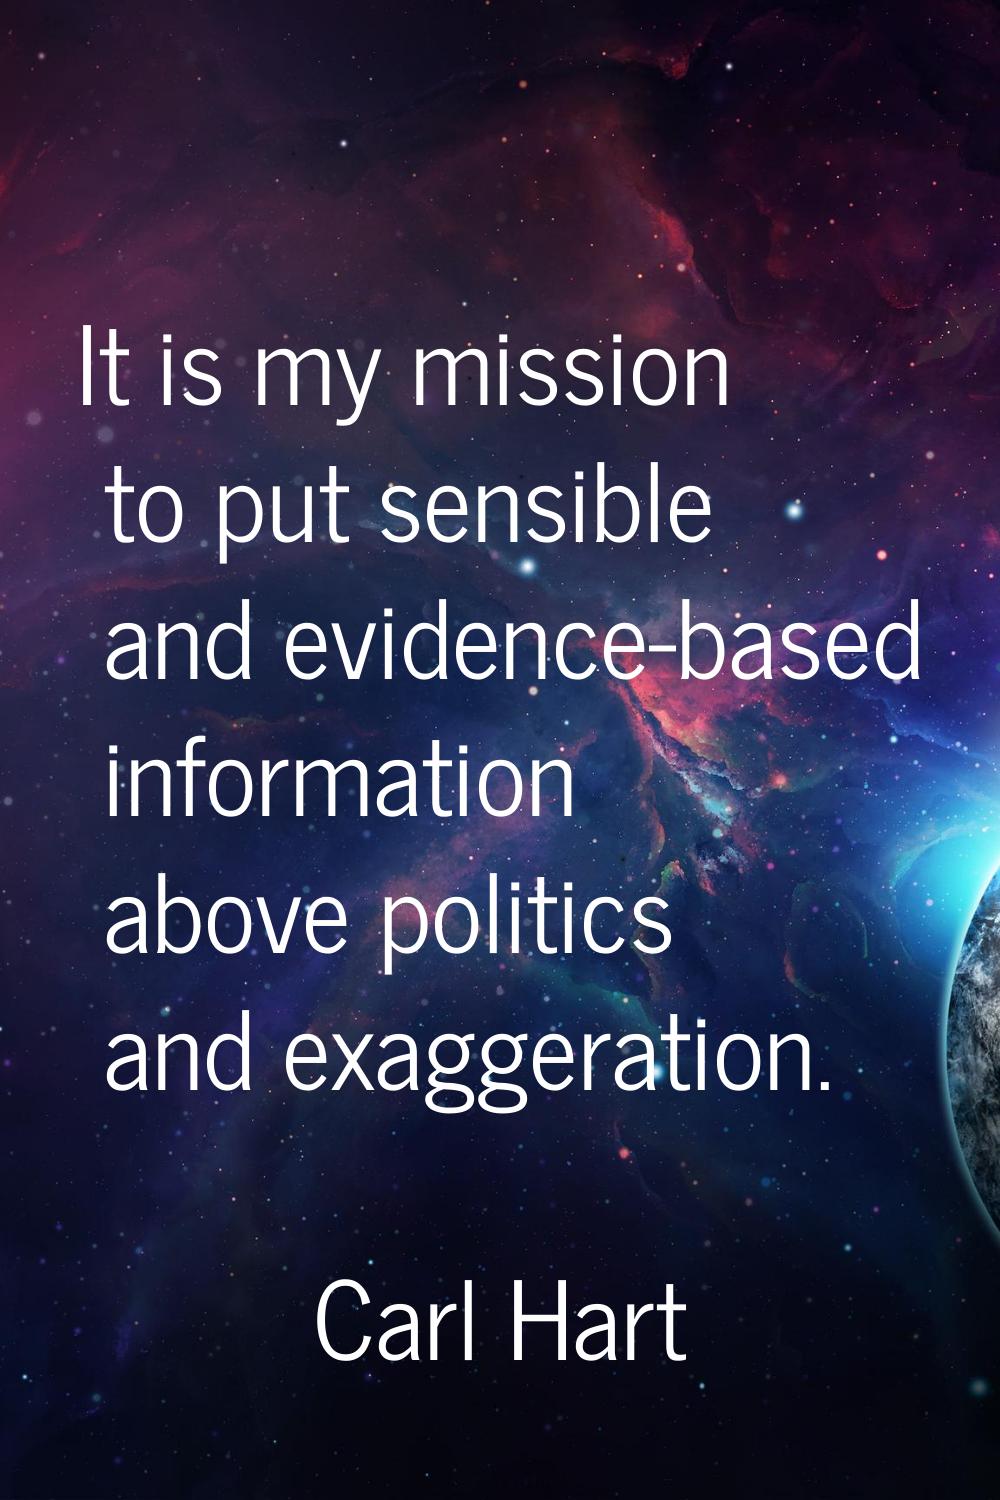 It is my mission to put sensible and evidence-based information above politics and exaggeration.